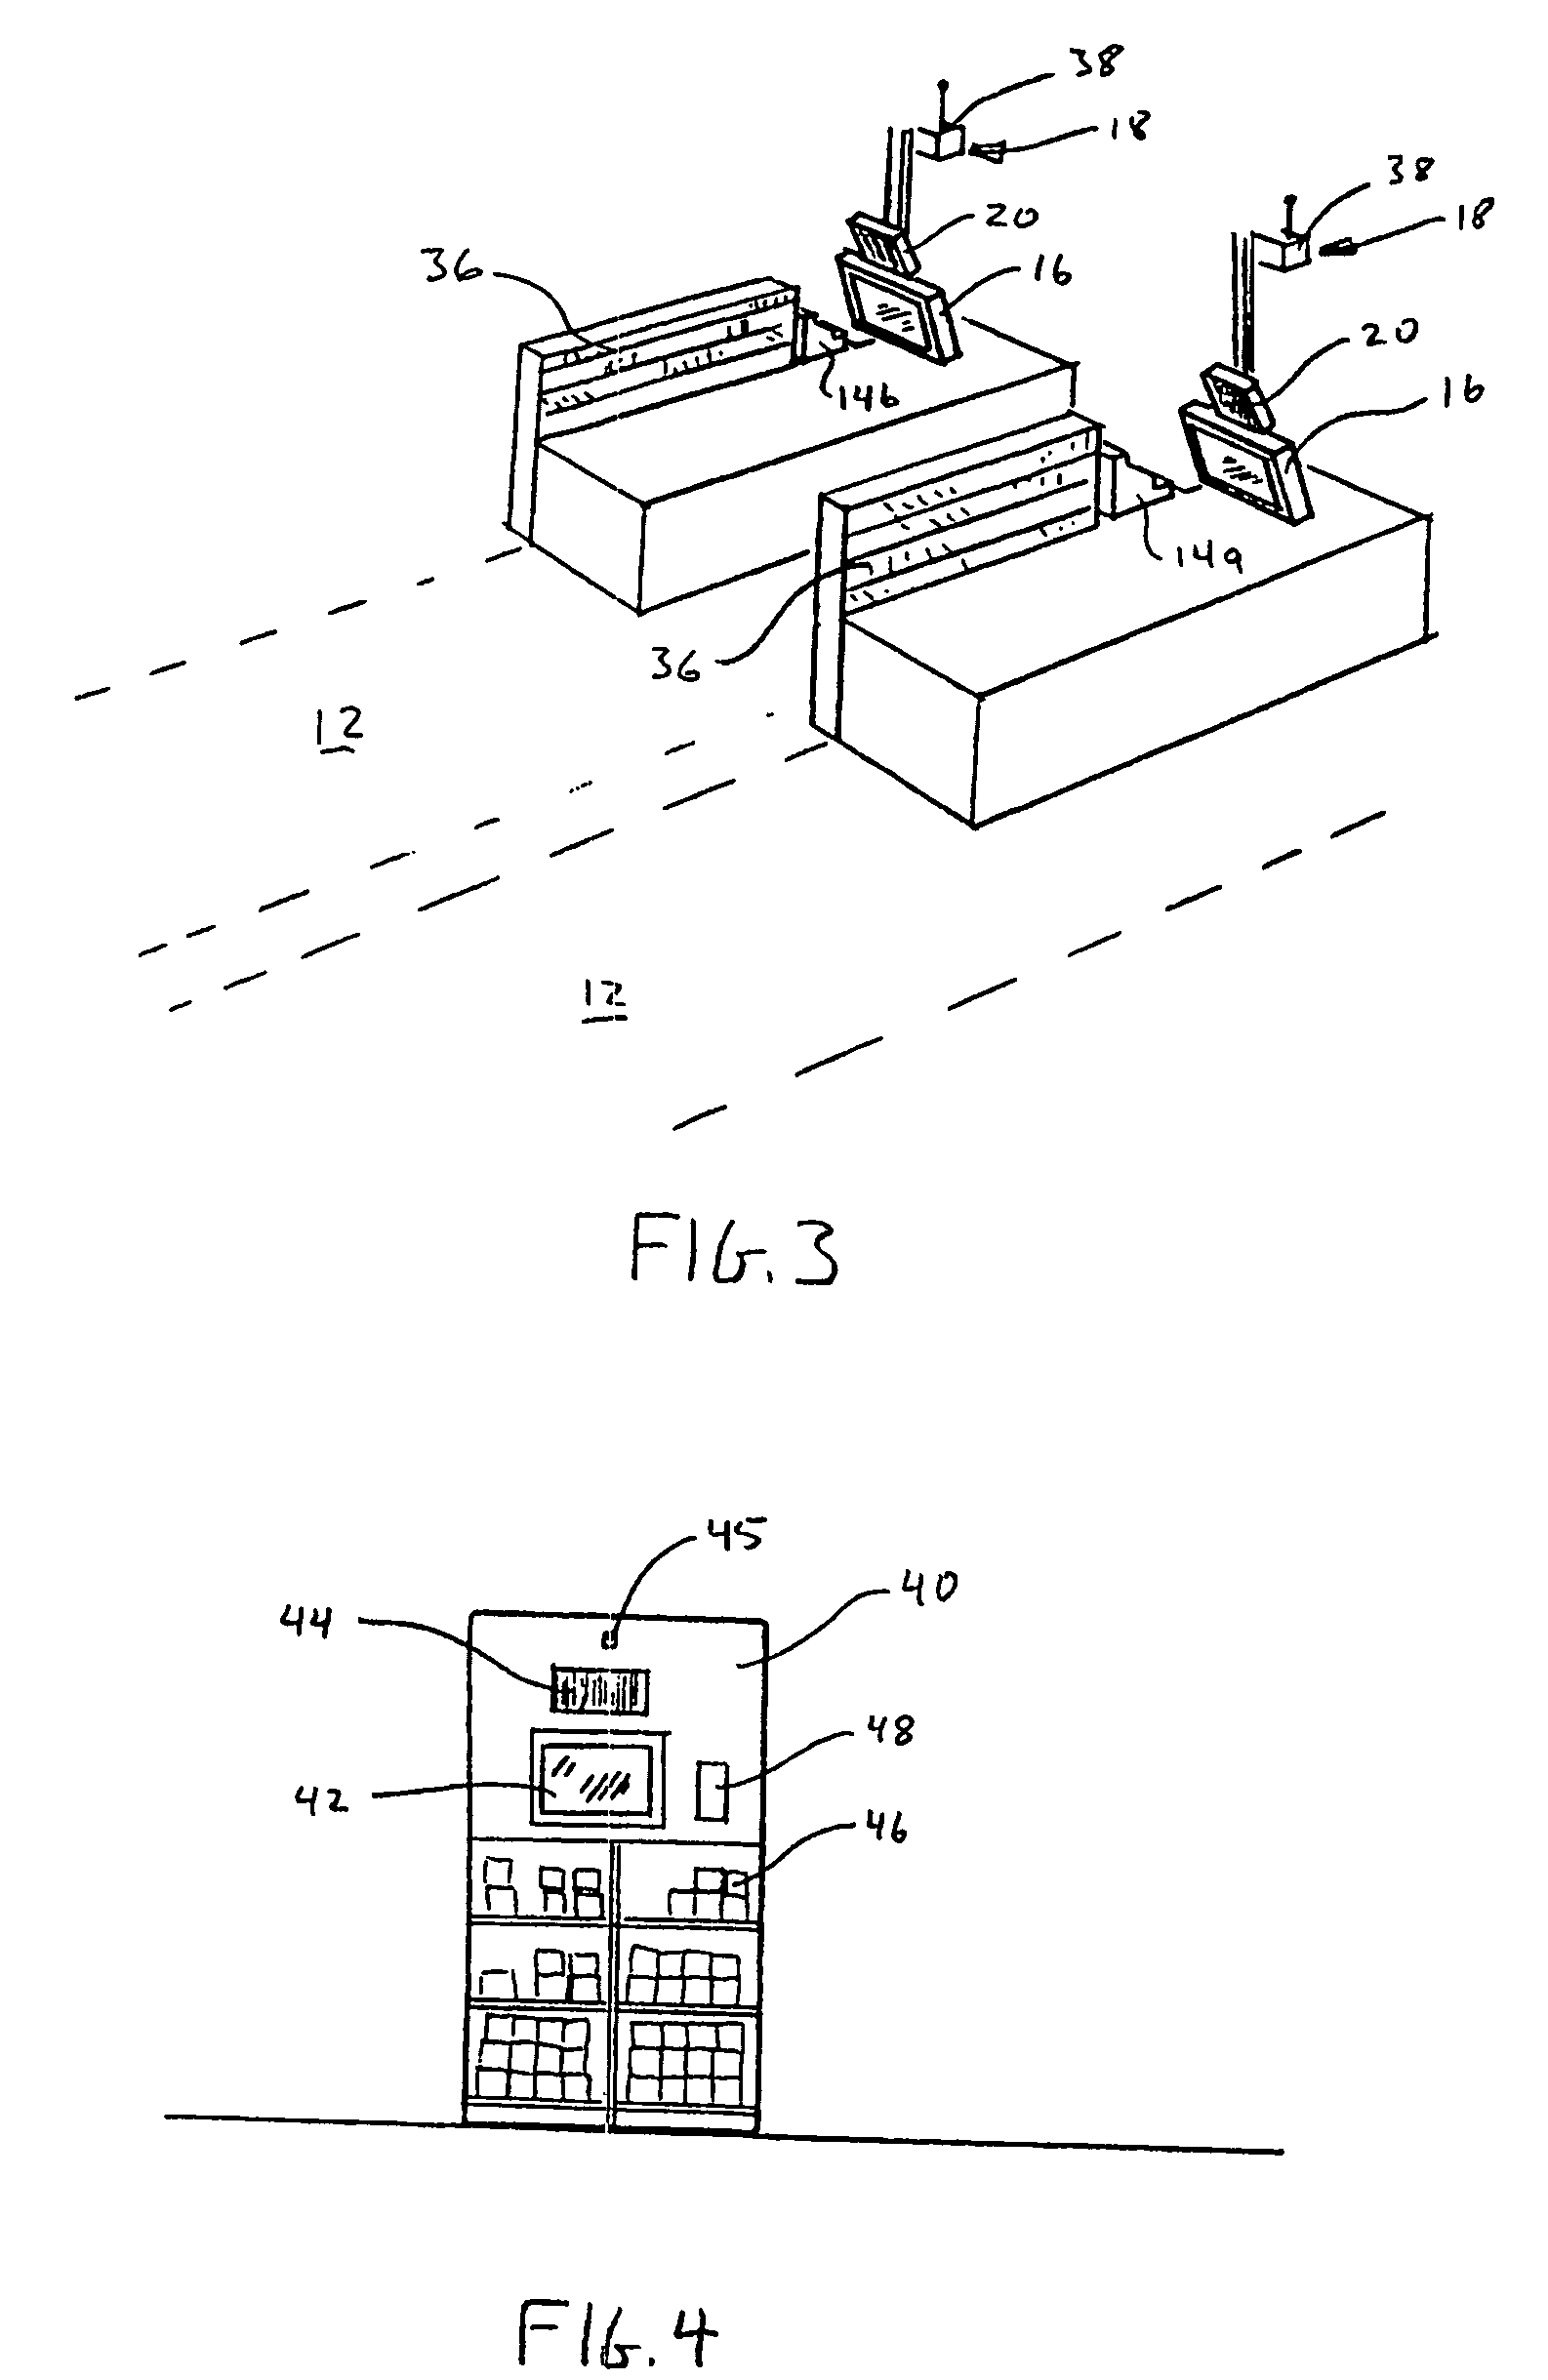 System and method for delivering audio-visual content along a customer waiting line